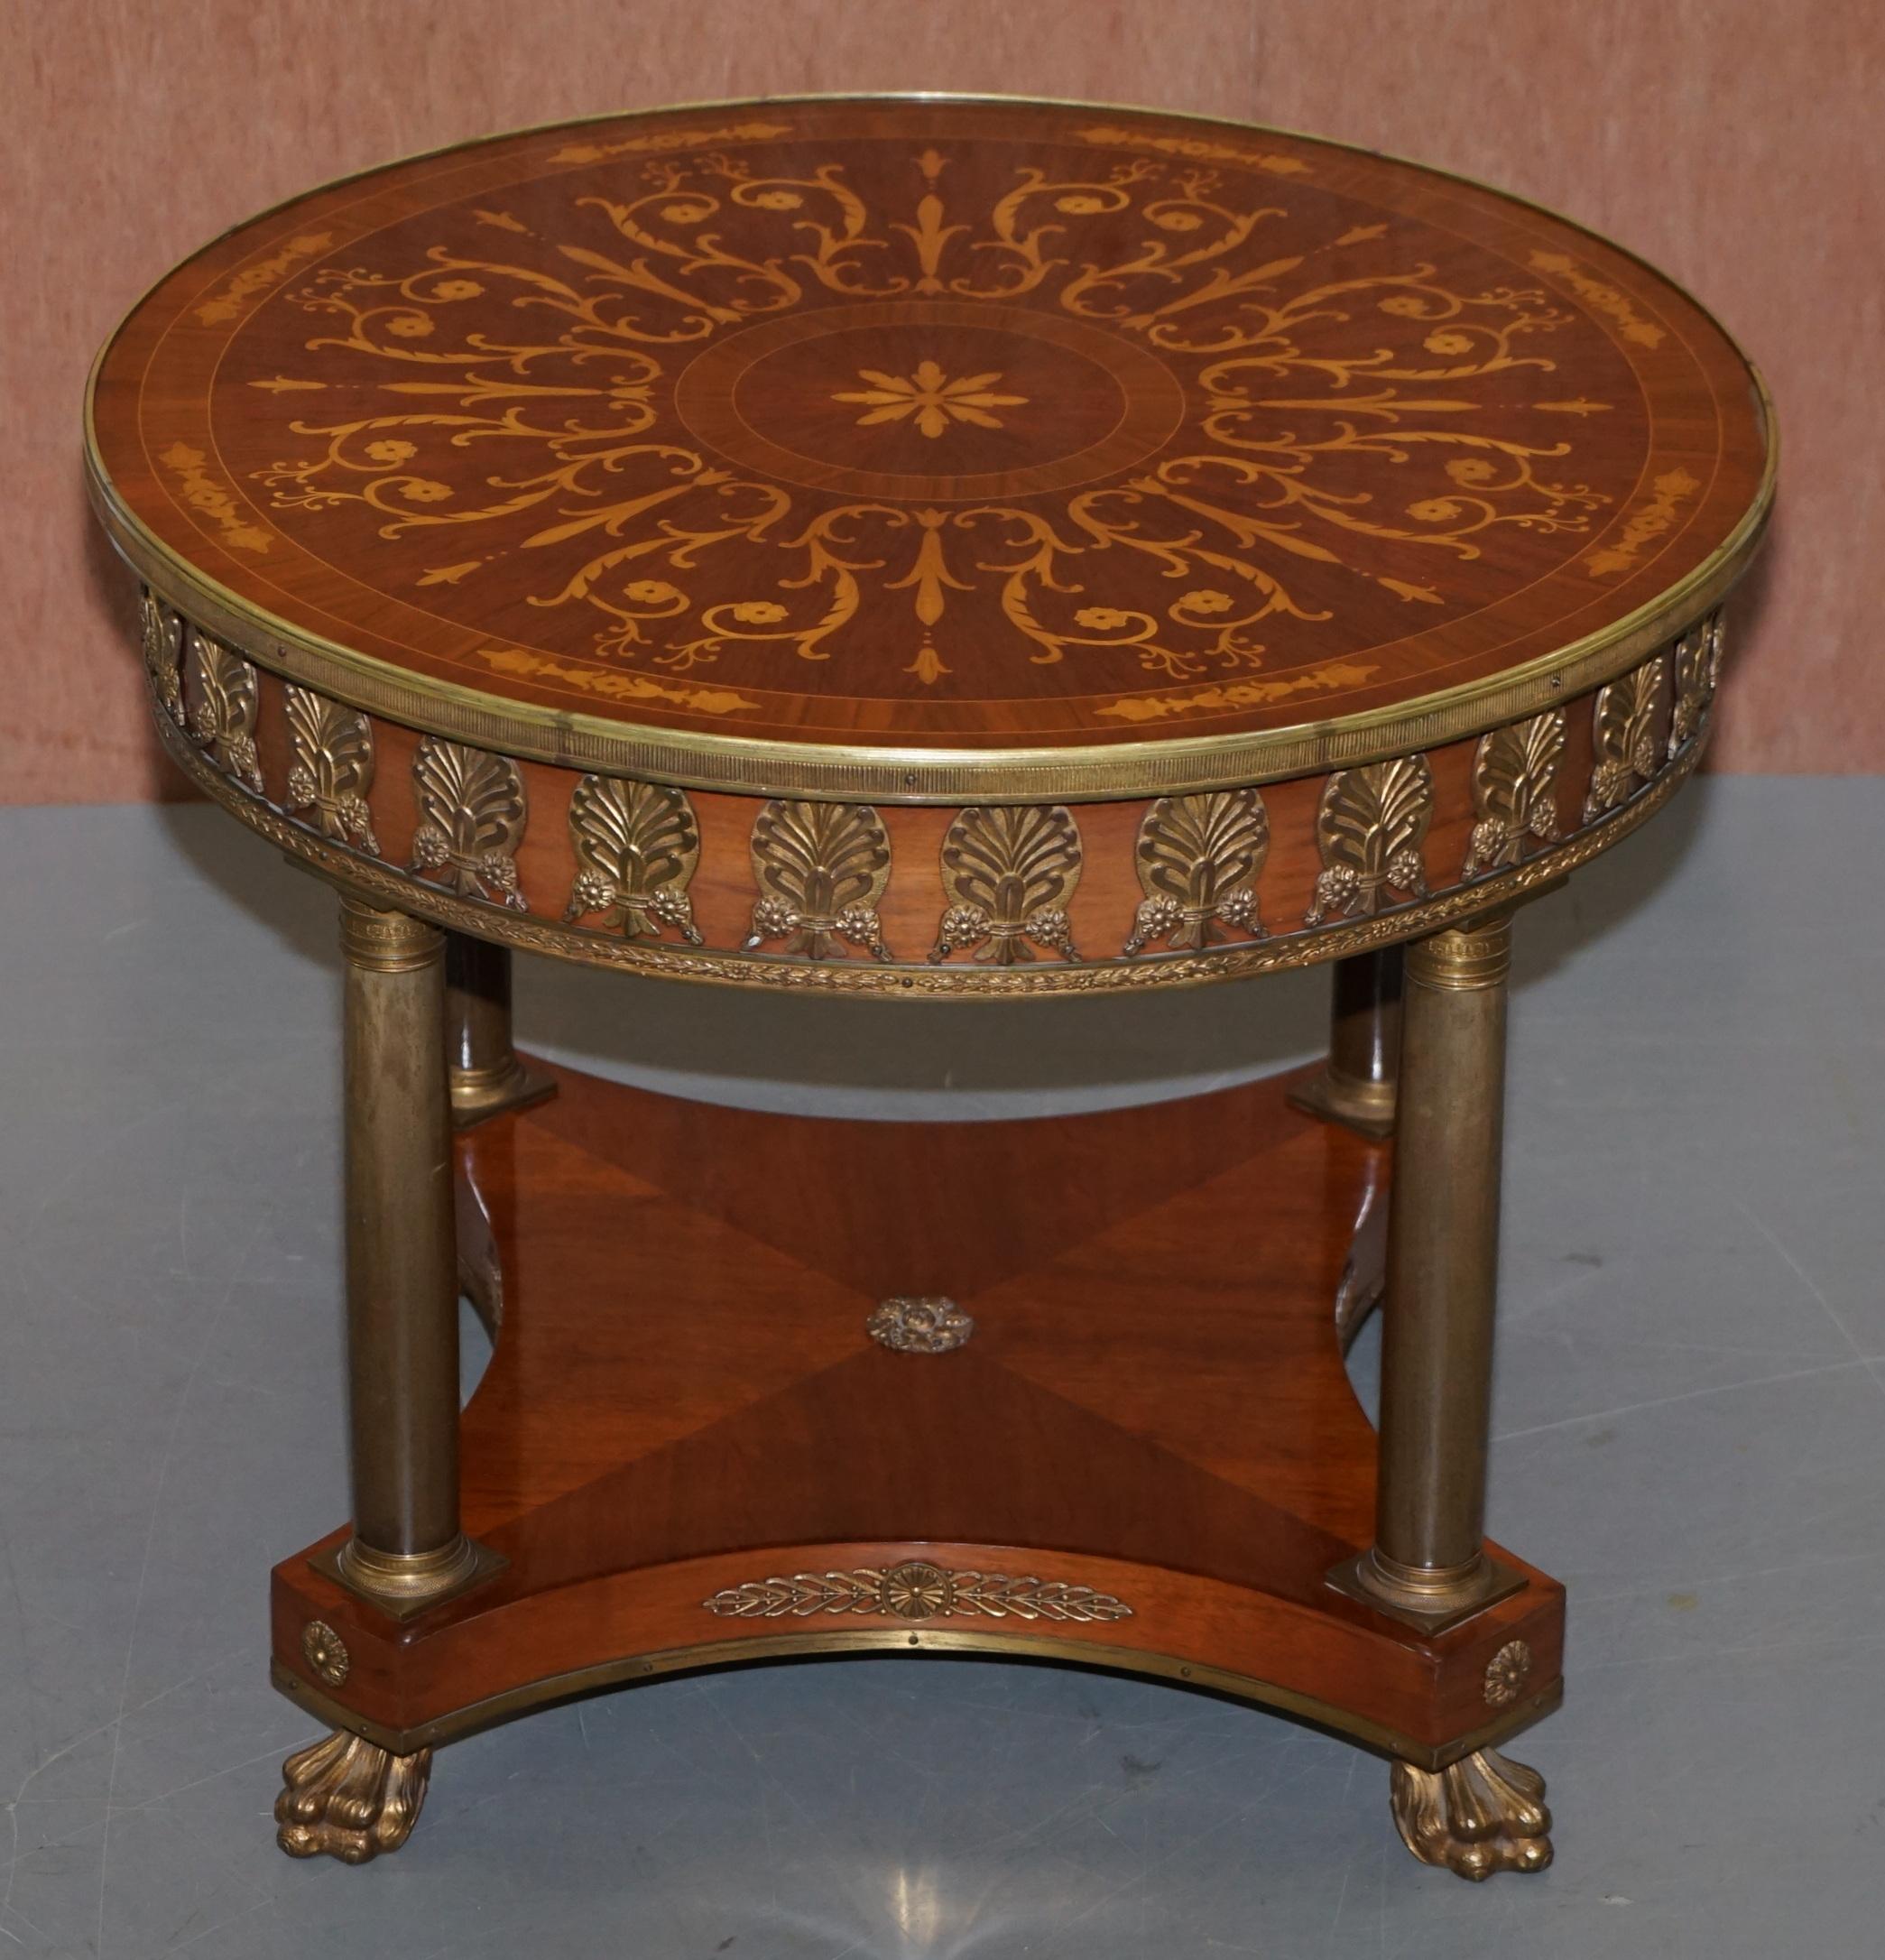 We are delighted to offer for sale they very well made beautifully inlaid large occasional side table with patinated bronze fixtures and fittings all over and Lion Hairy Paw feet

This is a large side table or small occasional centre table,